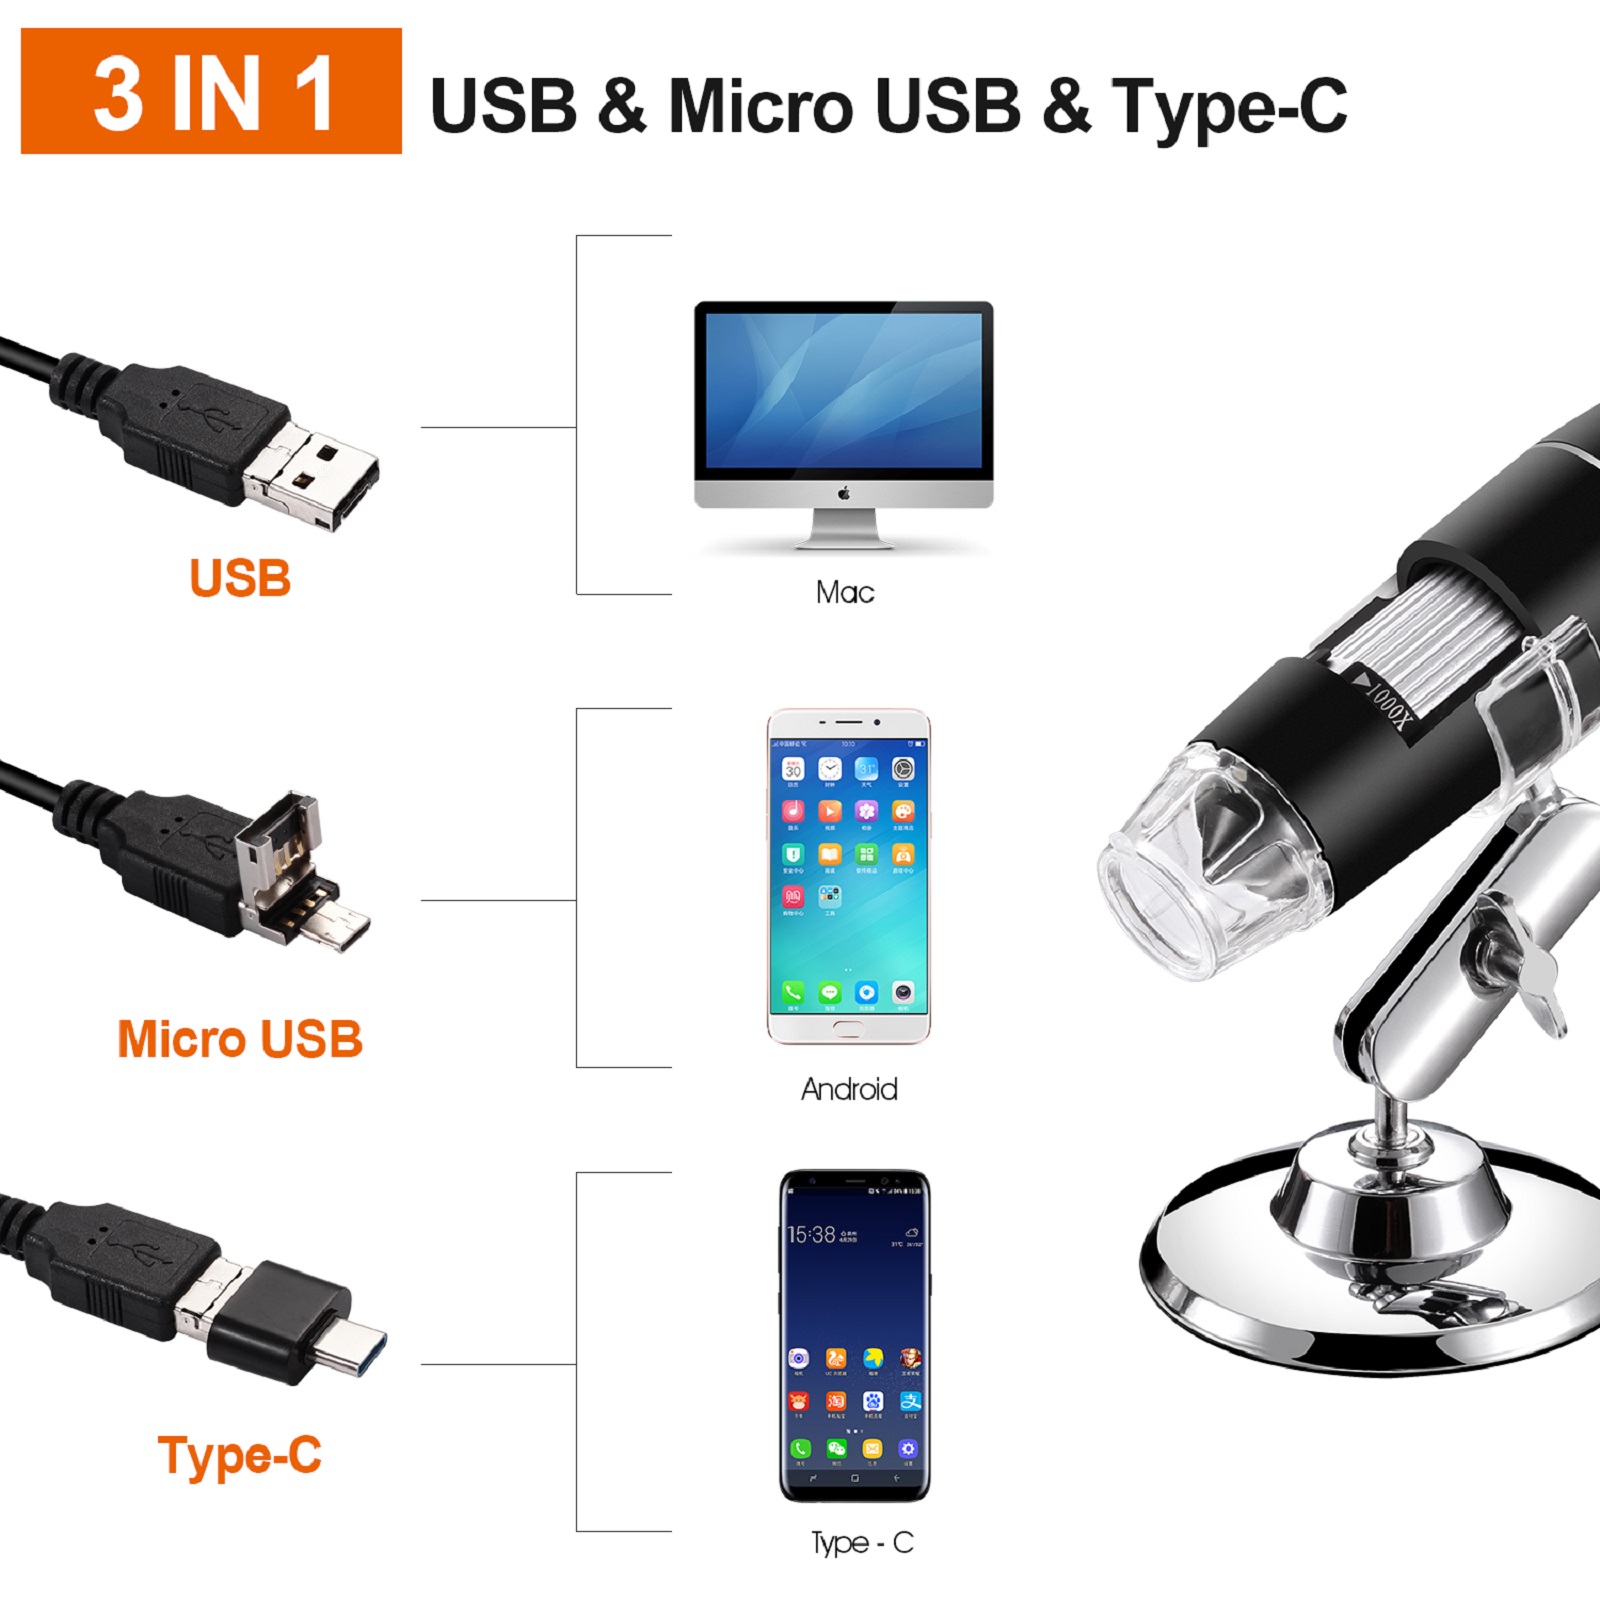 USB Digital Microscope with Carrying Case